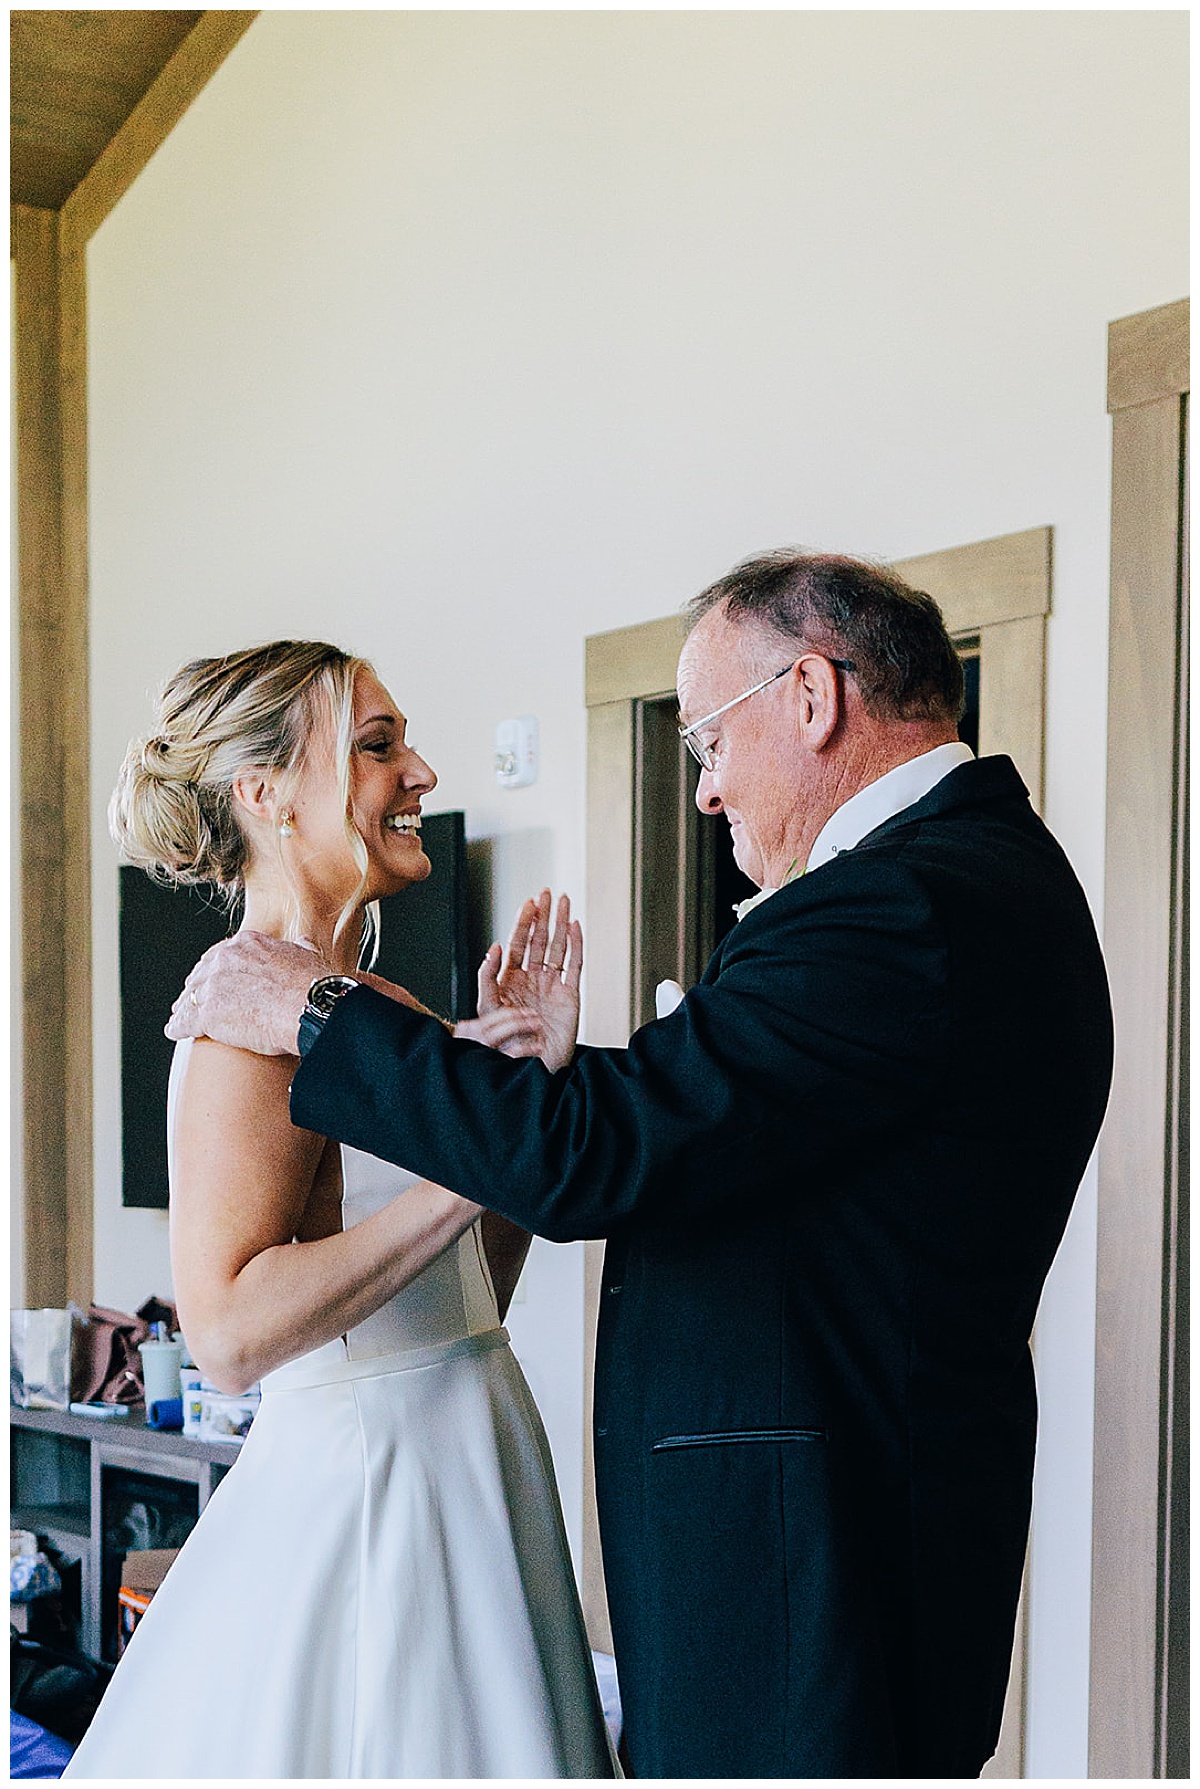 Dad sees bride for the first time by Kayla Bouren Photography